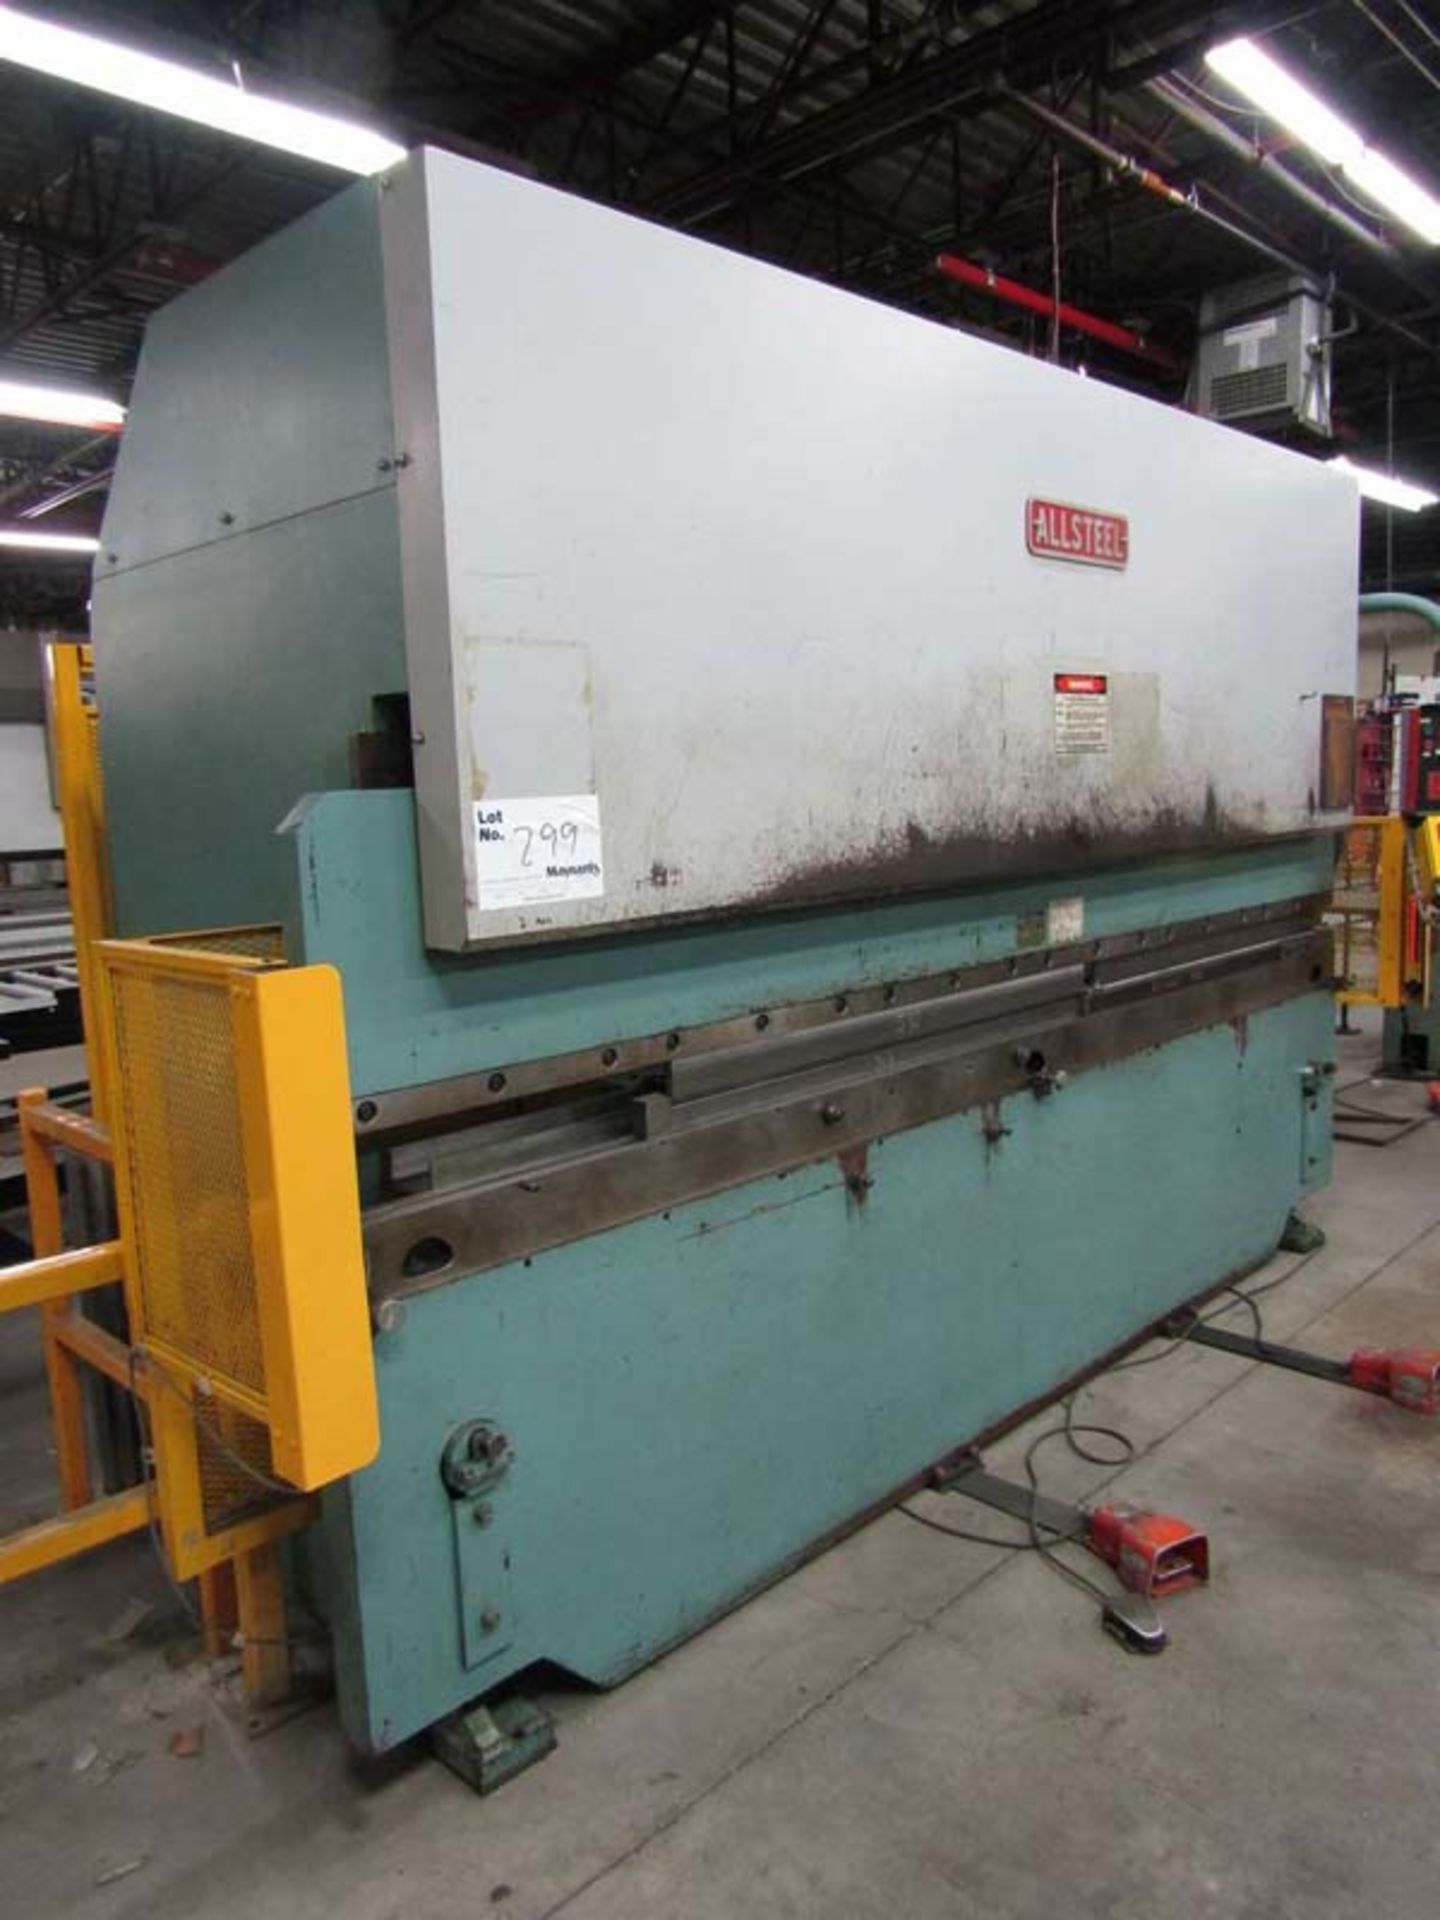 Allsteel CNC 2 Axis Hyd. Press Brake, 70-Ton x 12' - Located In Painesville, OH - 8452